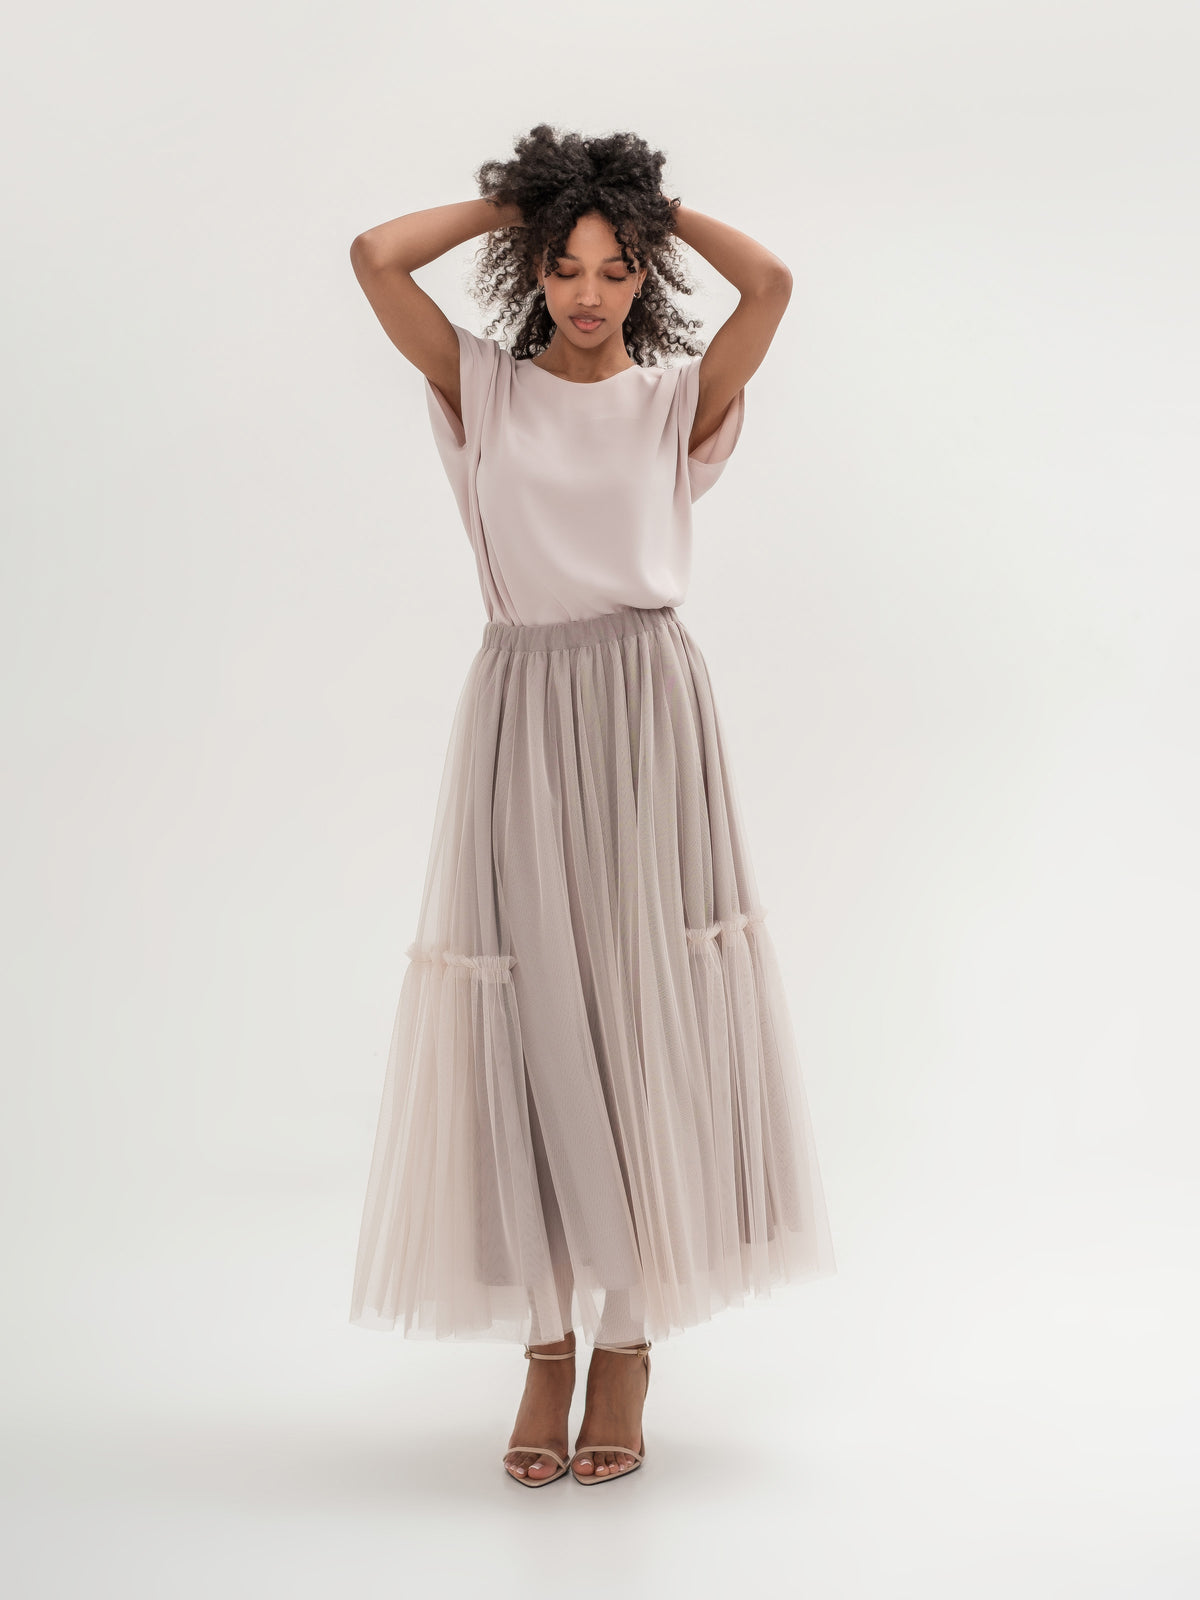 Cappuccino tulle lined skirt with elastic waist one size